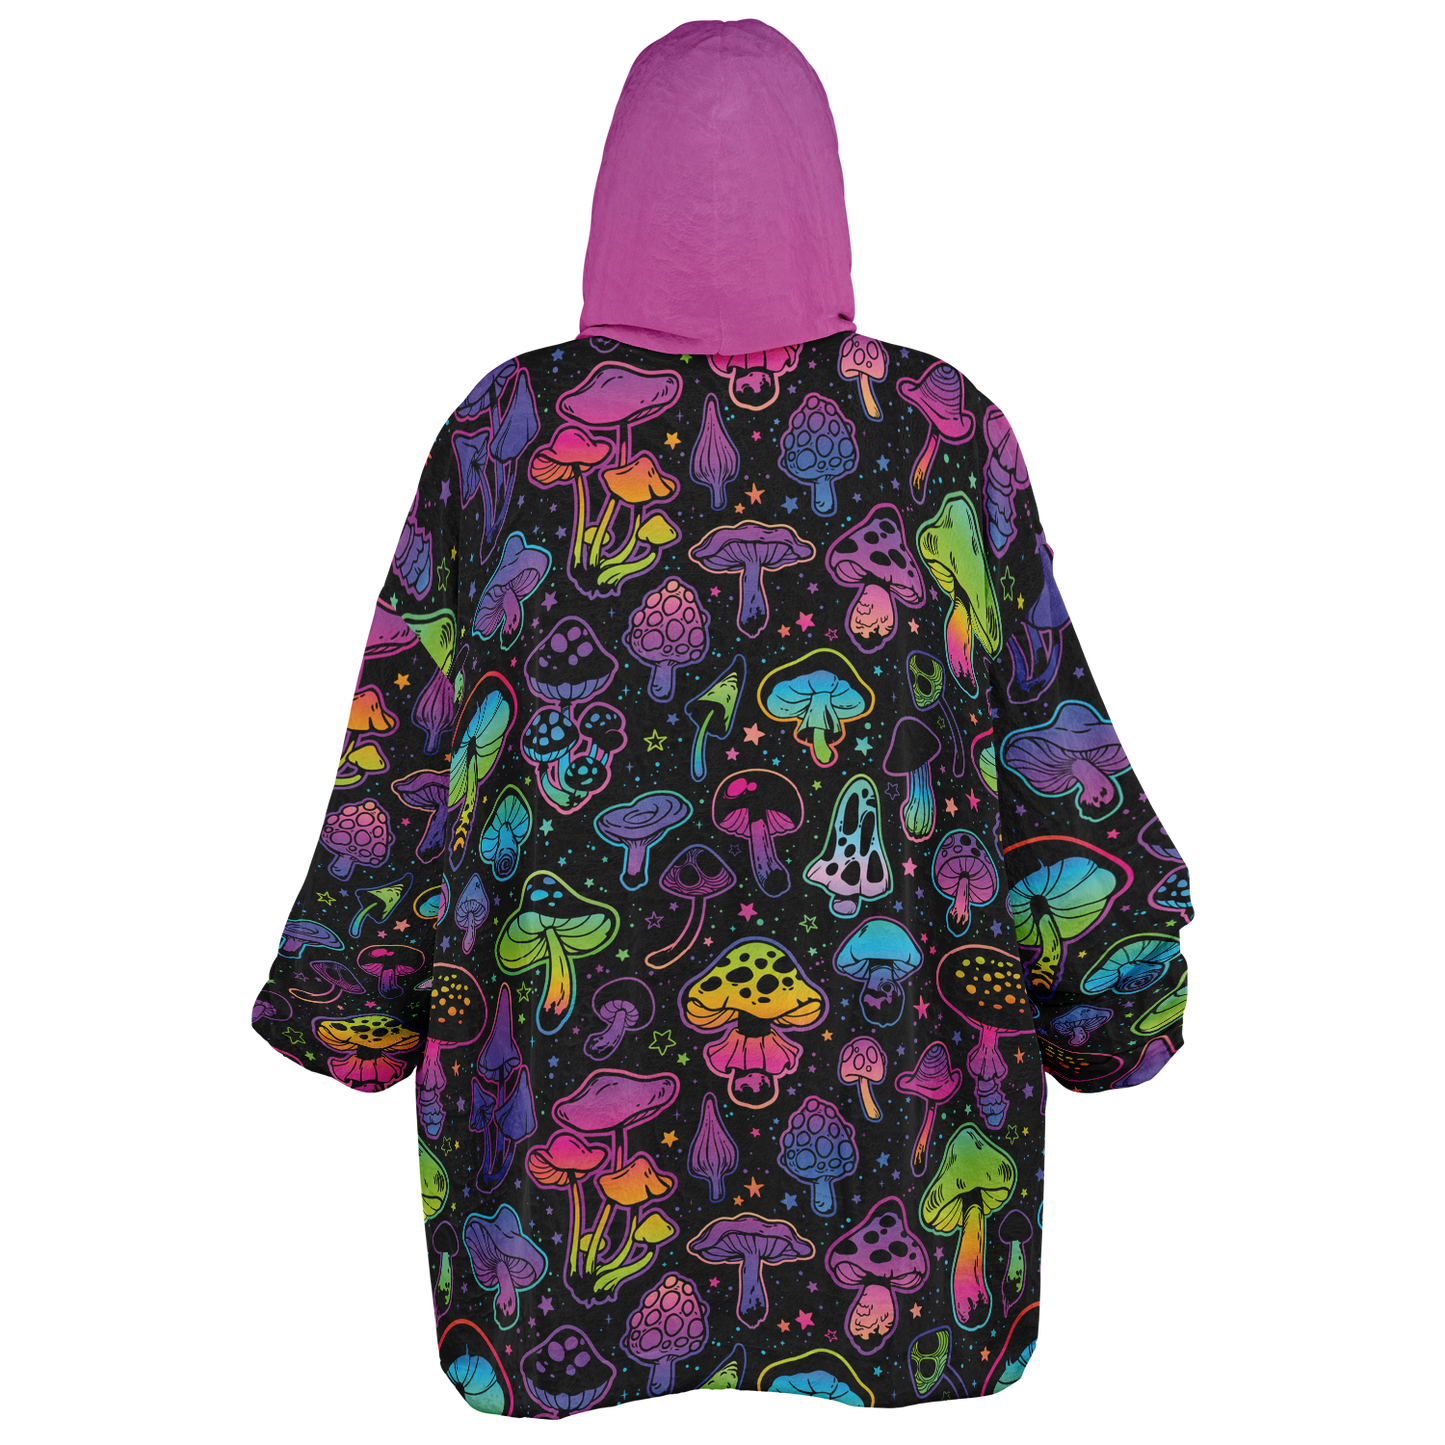 My Head is Spinnin' Super Hoodie - Available for a Strictly Limited Time - Buy 2 & Get FREE Shipping